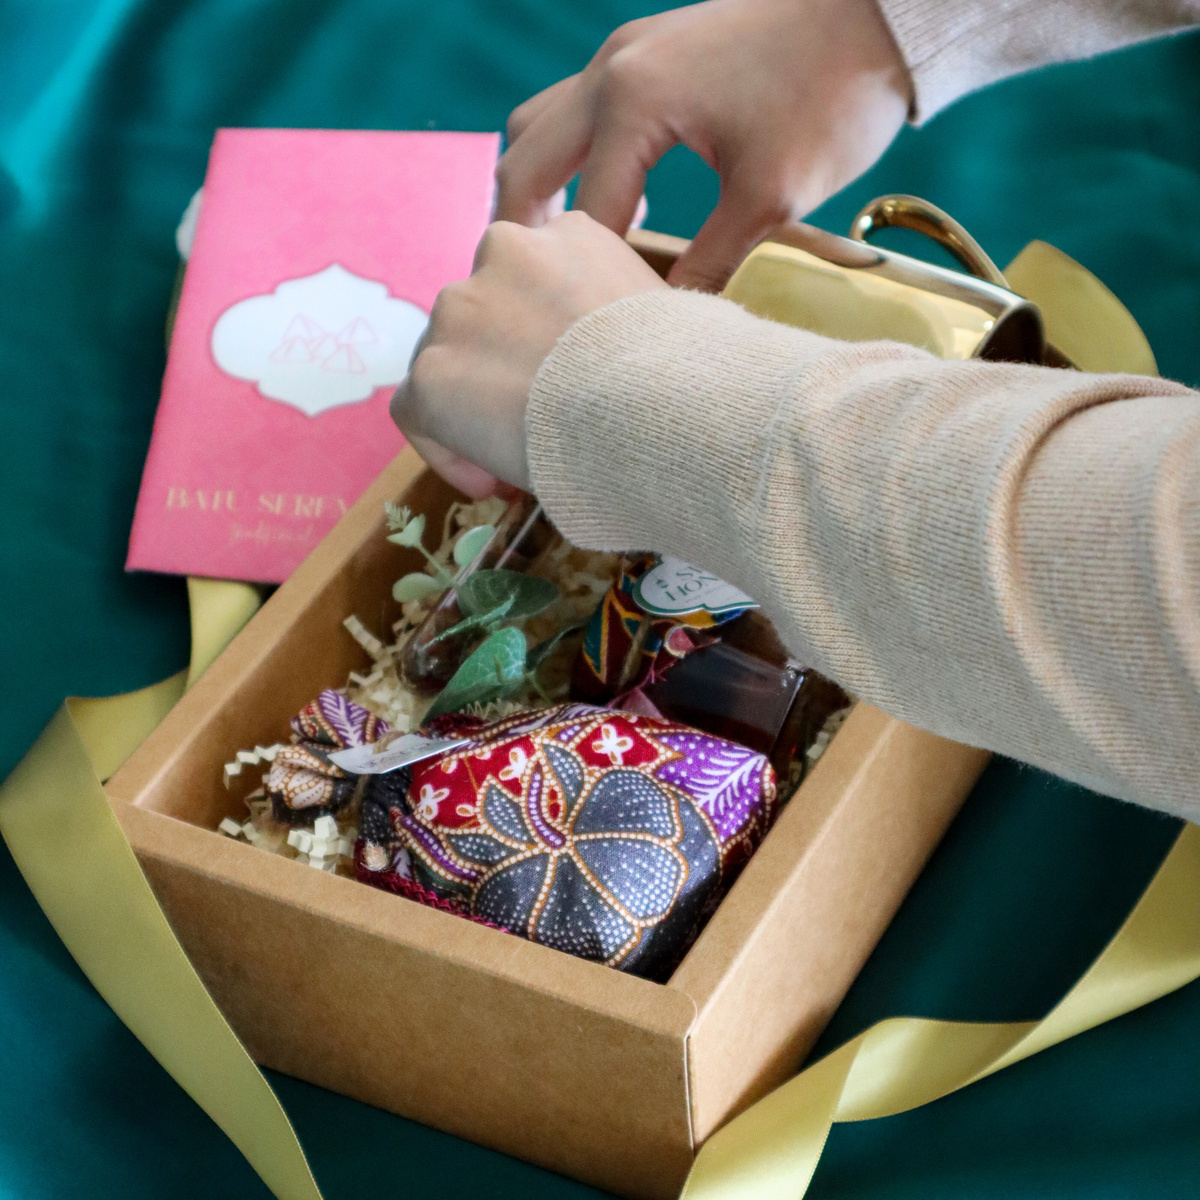 A range of raya-themed items allow customers to mix and match to build their own giftbox for their loved one, friends, families and colleagues, boss and many more to celebrate this raya.